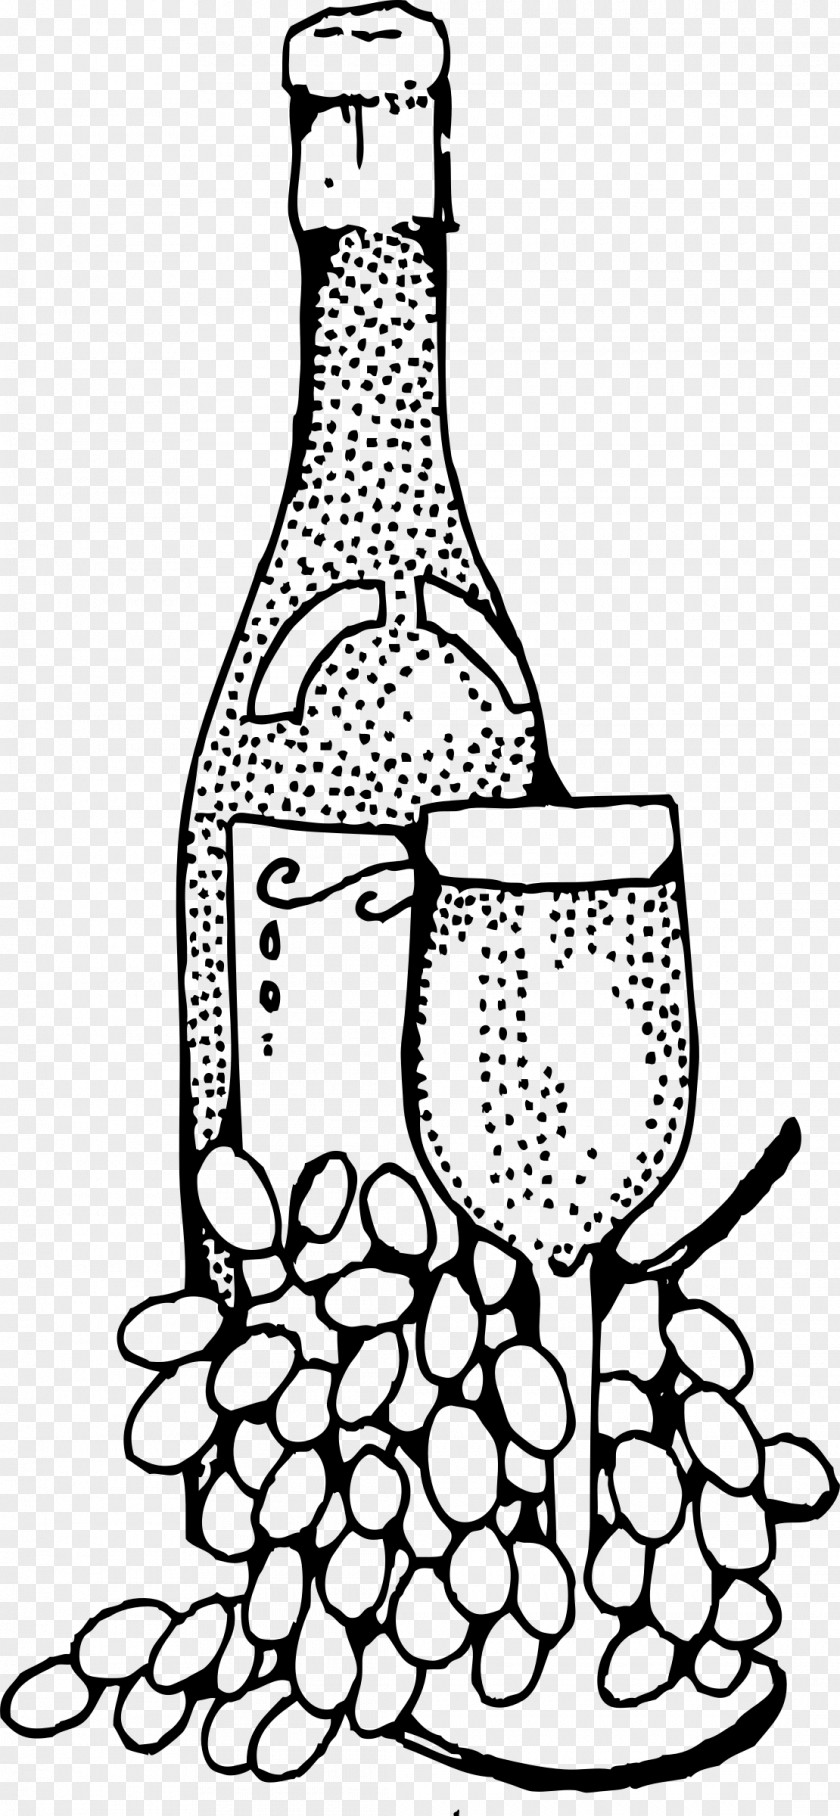 Wine Bottle Sketch Ready-to-Use Food And Drink Spot Illustrations Clip Art PNG